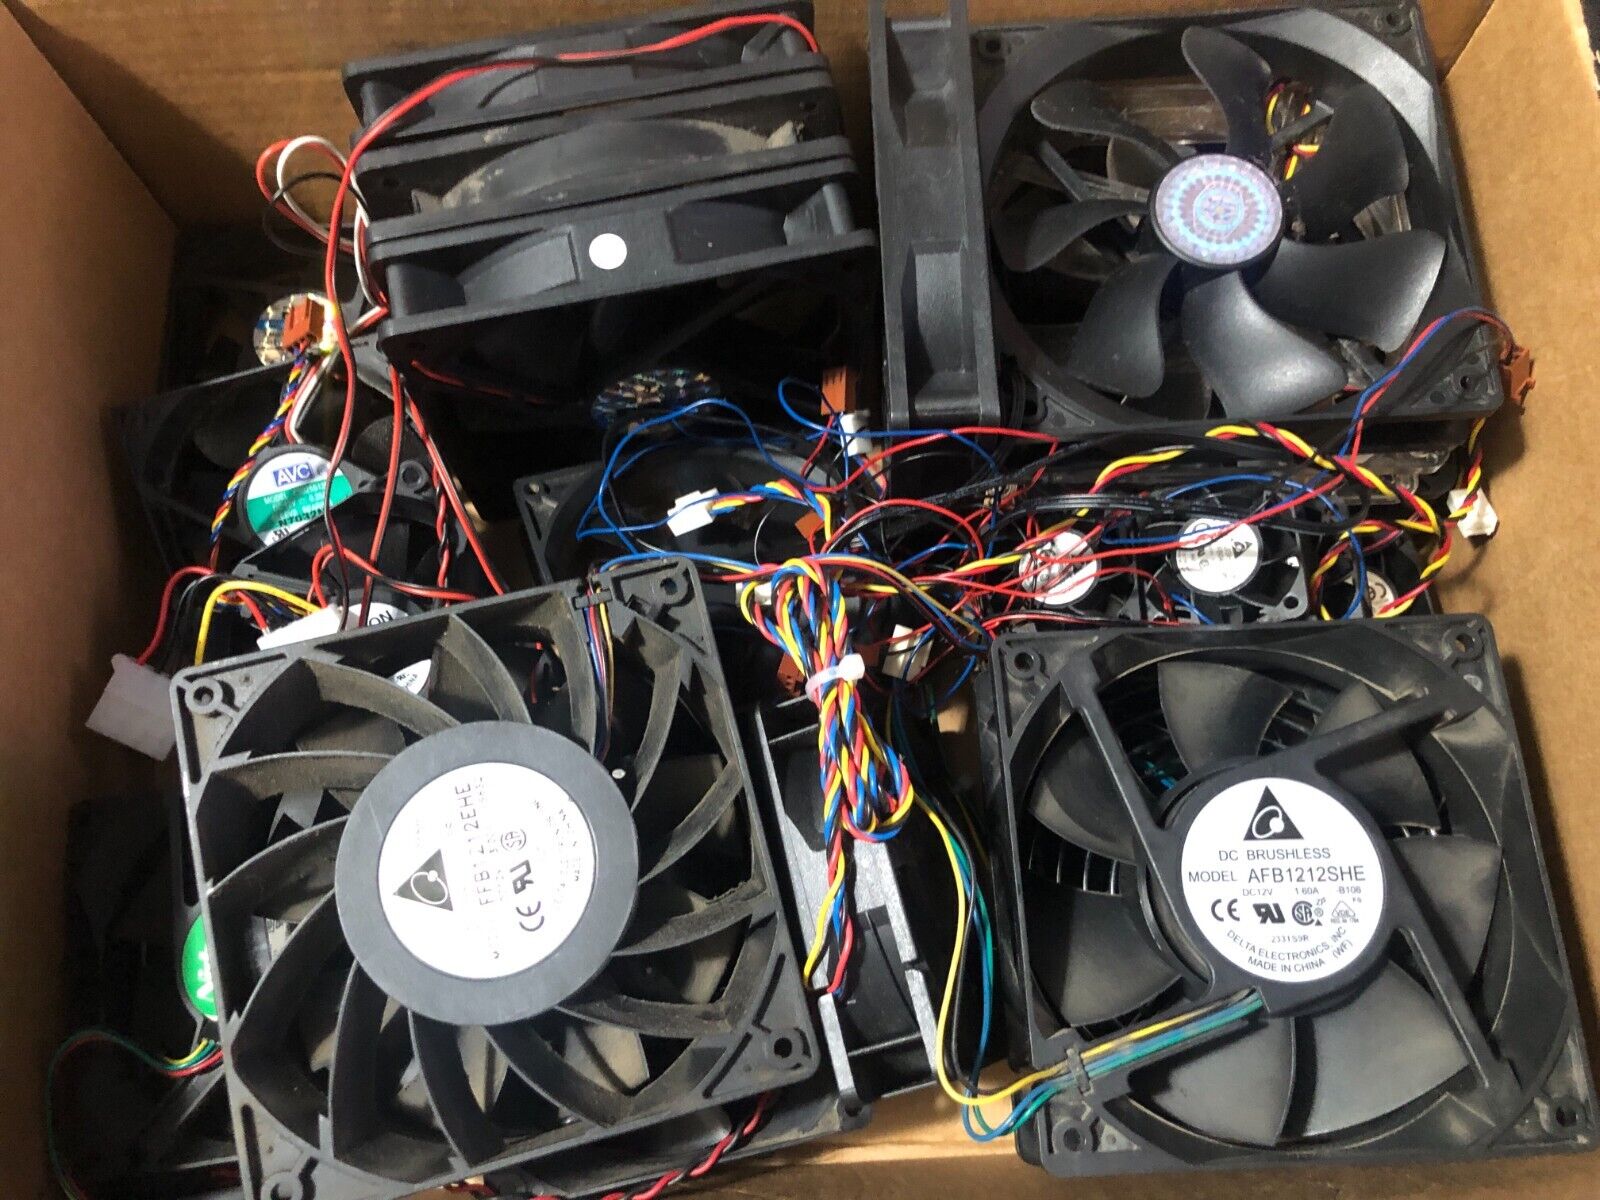 LOT OF ABOUT 23 COMPUTER FANS UNTESTED